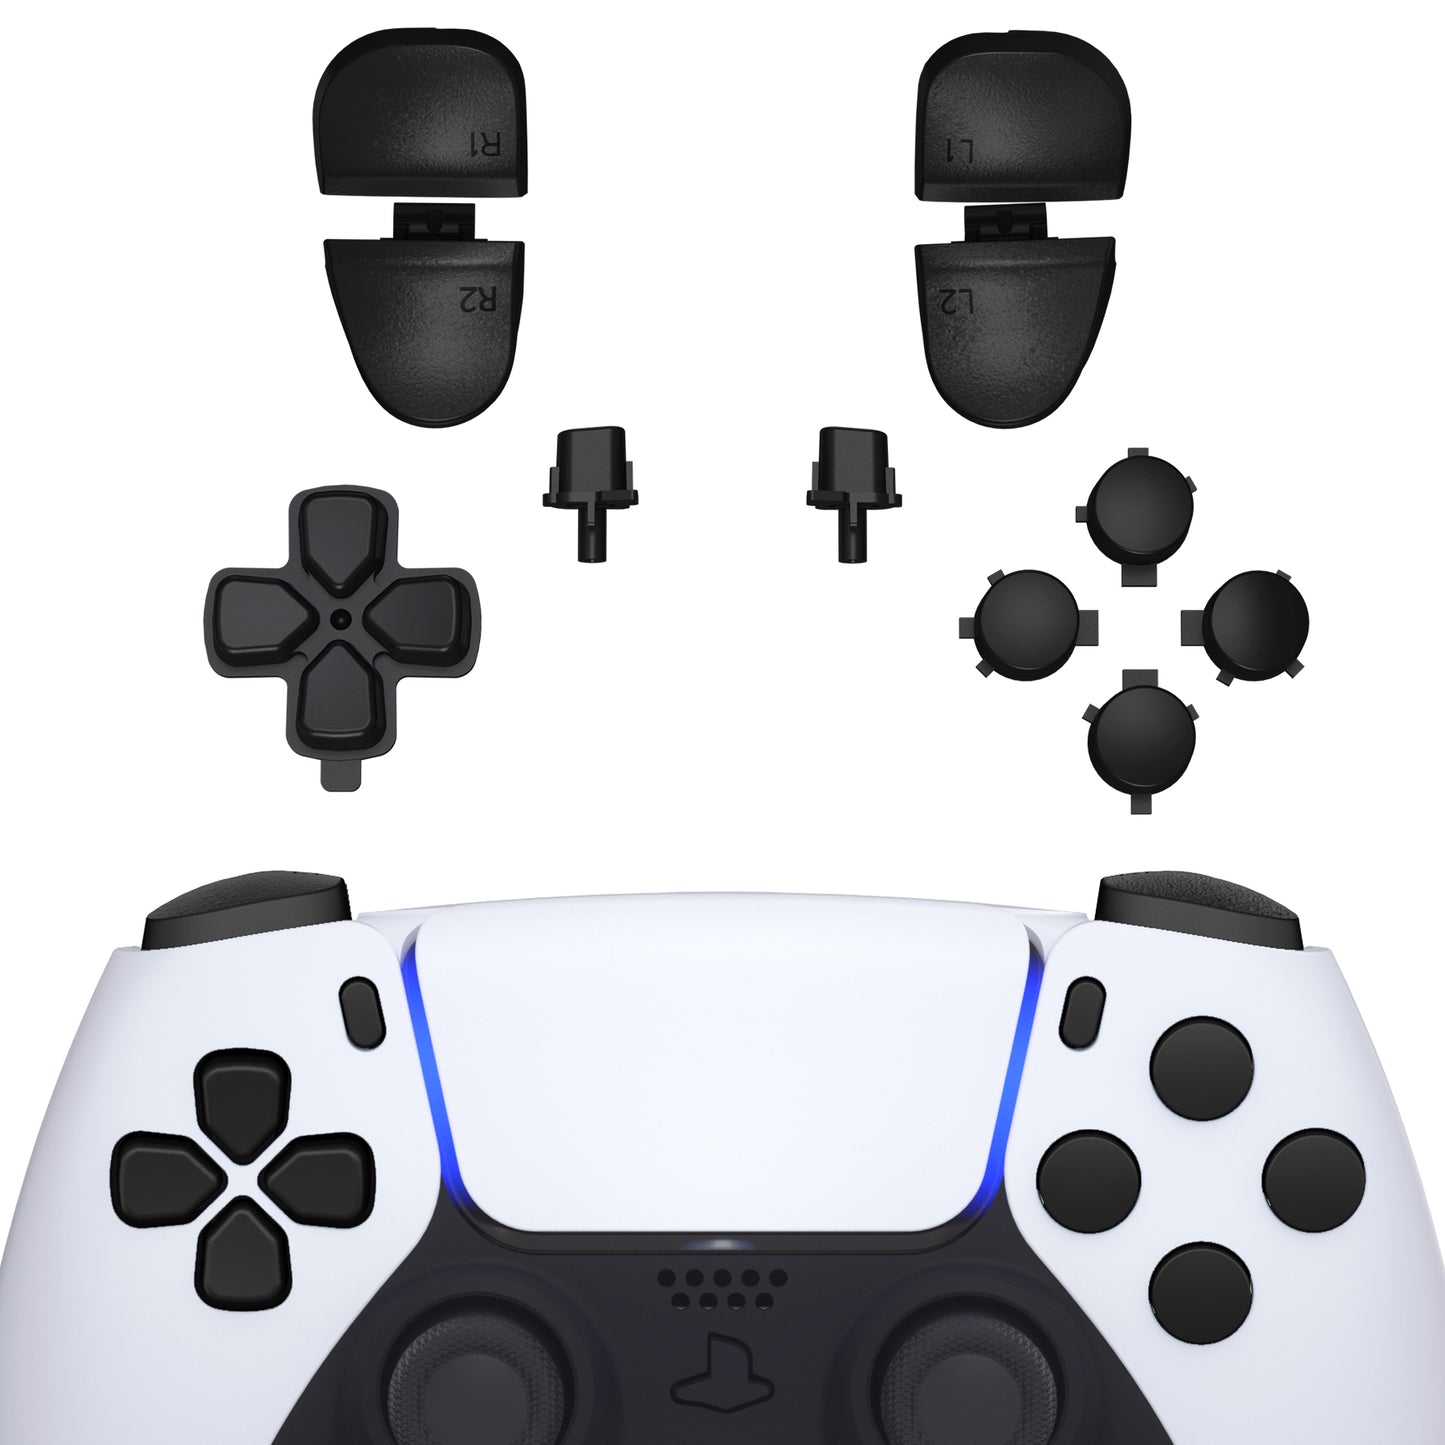 eXtremeRate Retail Replacement D-pad R1 L1 R2 L2 Triggers Share Options Face Buttons, Black Full Set Buttons Compatible with ps5 Controller BDM-030 - JPF1009G3